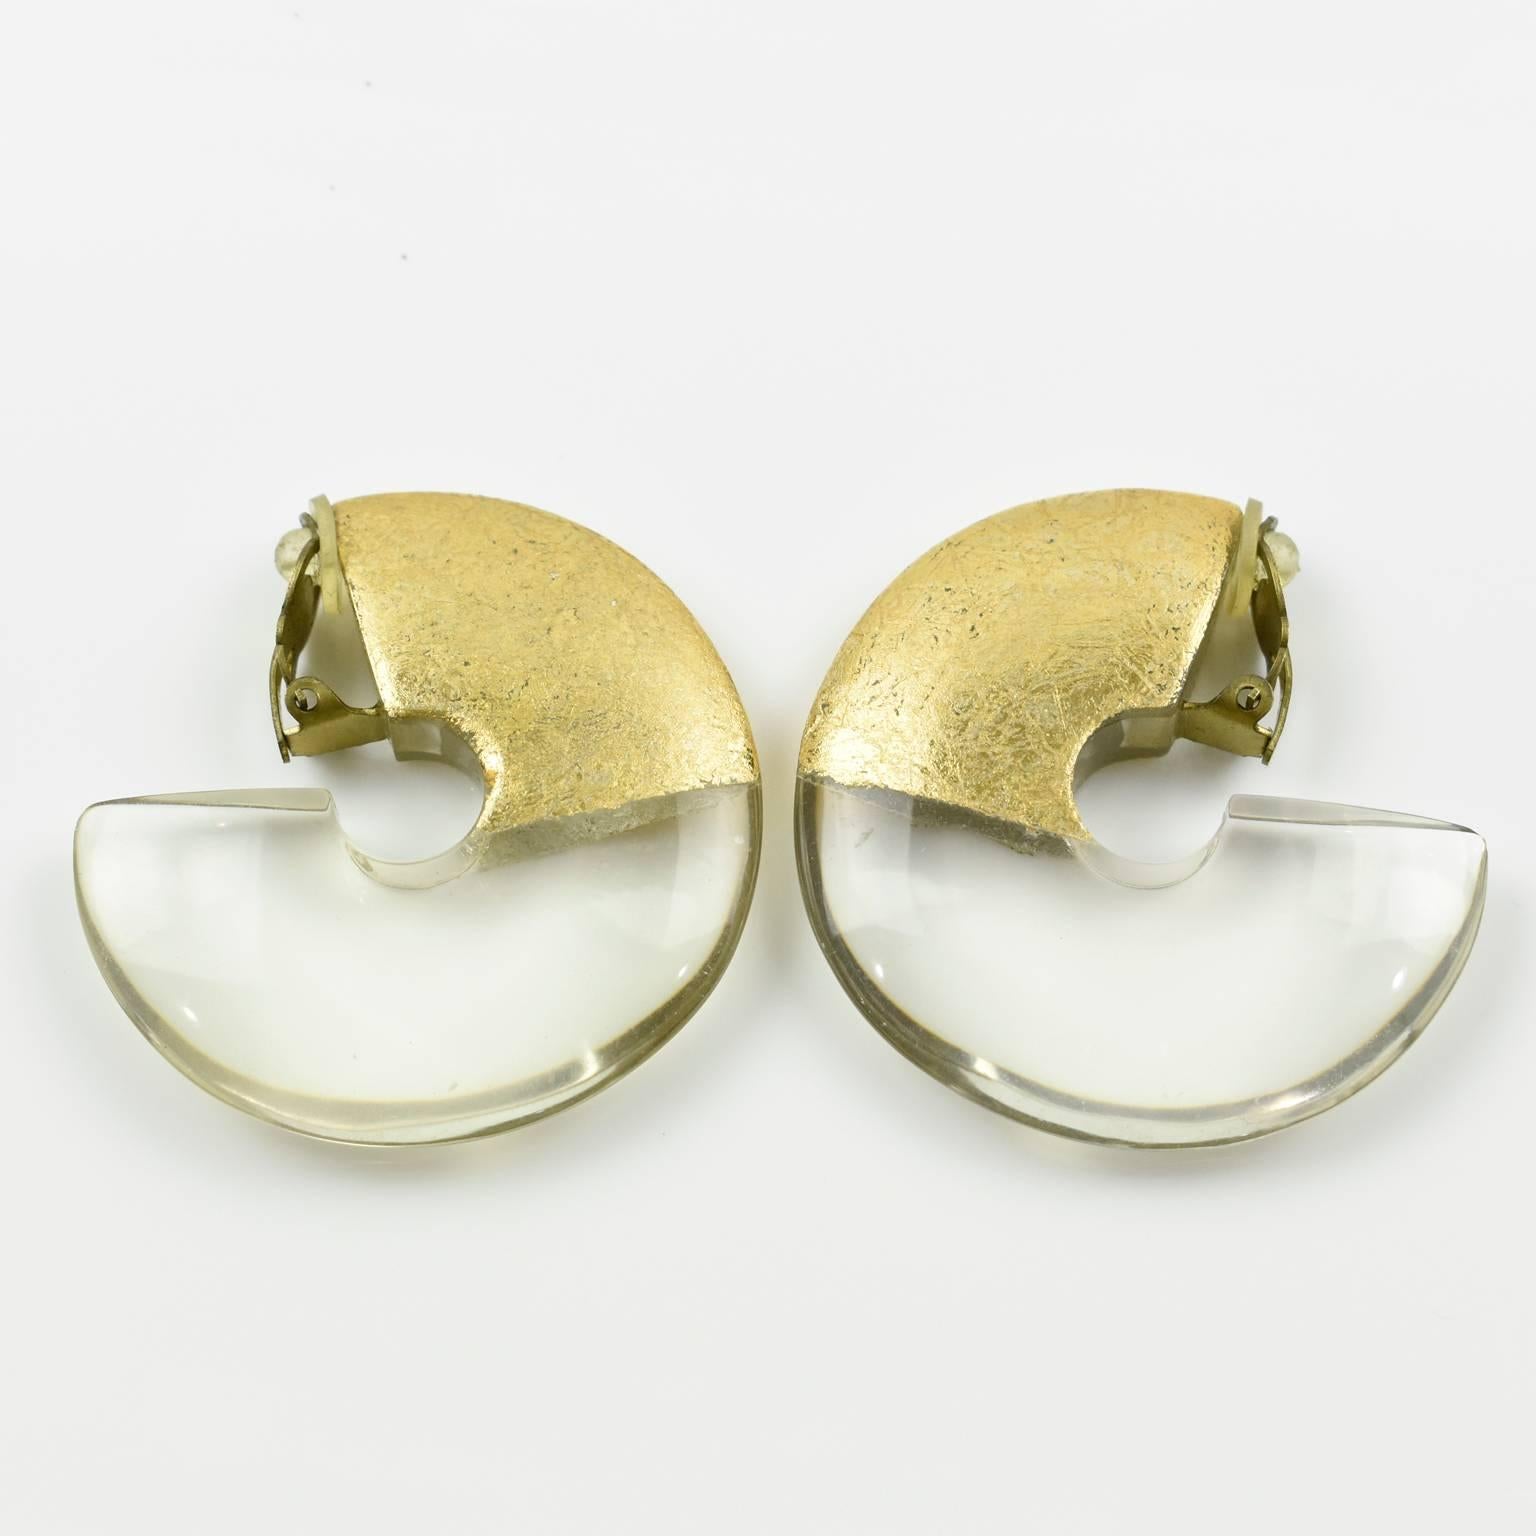 Stunning oversized clip on earrings by Gerda Lyngaard for Monies. Crystal clear Lucite and gold foil application. Marked 'Monies' on clasp. 
Measurements: 2.13 in. diameter (5.4 cm) x 0.38 in. thick (1 cm)